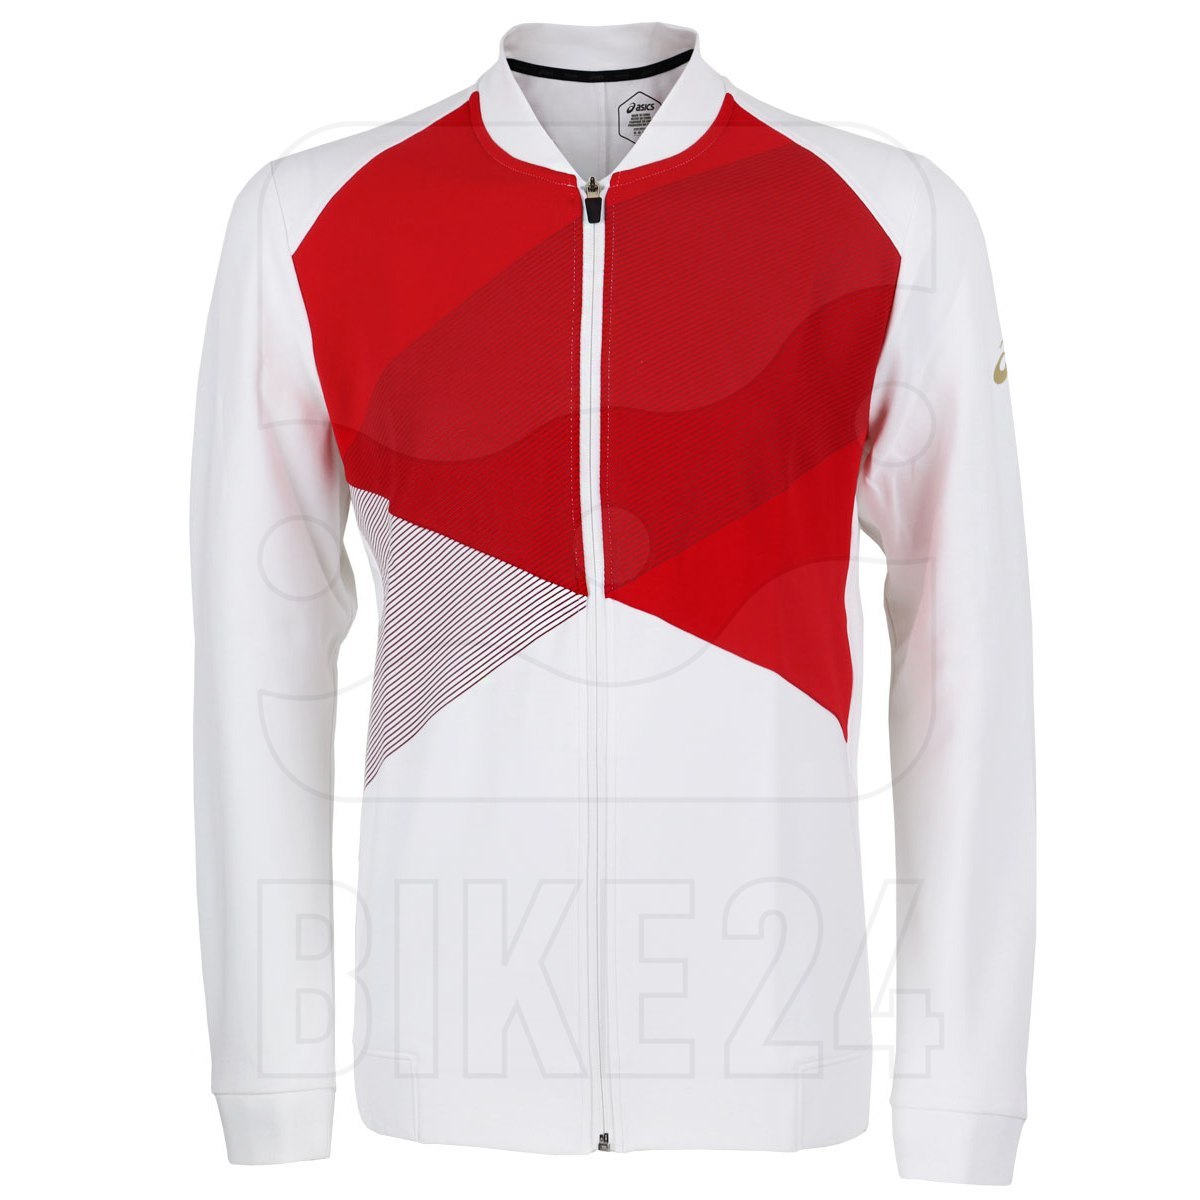 Image of asics Tokyo Warm Up Training Top - brilliant white/classic red